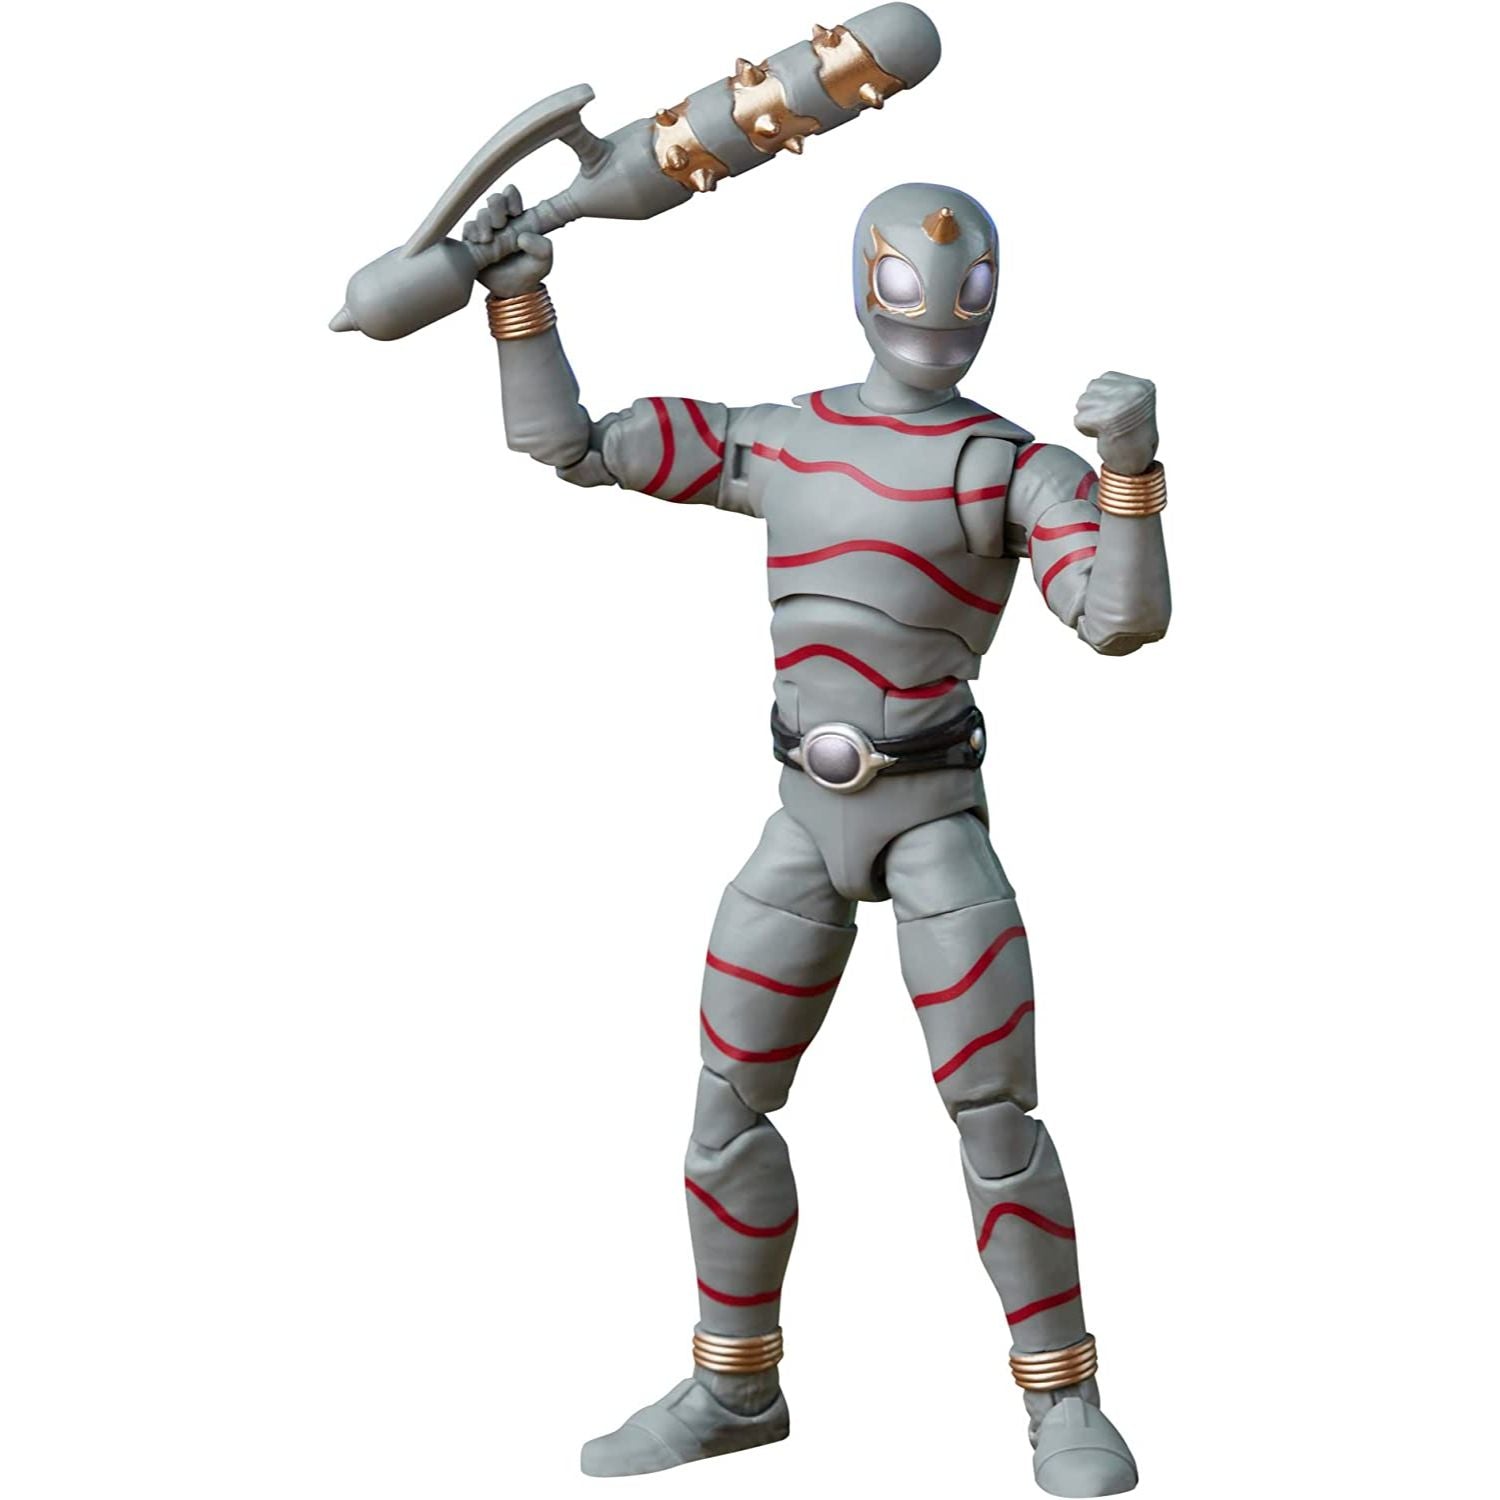 Power Rangers Lightning Collection Wild Force Putrid 6-inch Action Figure